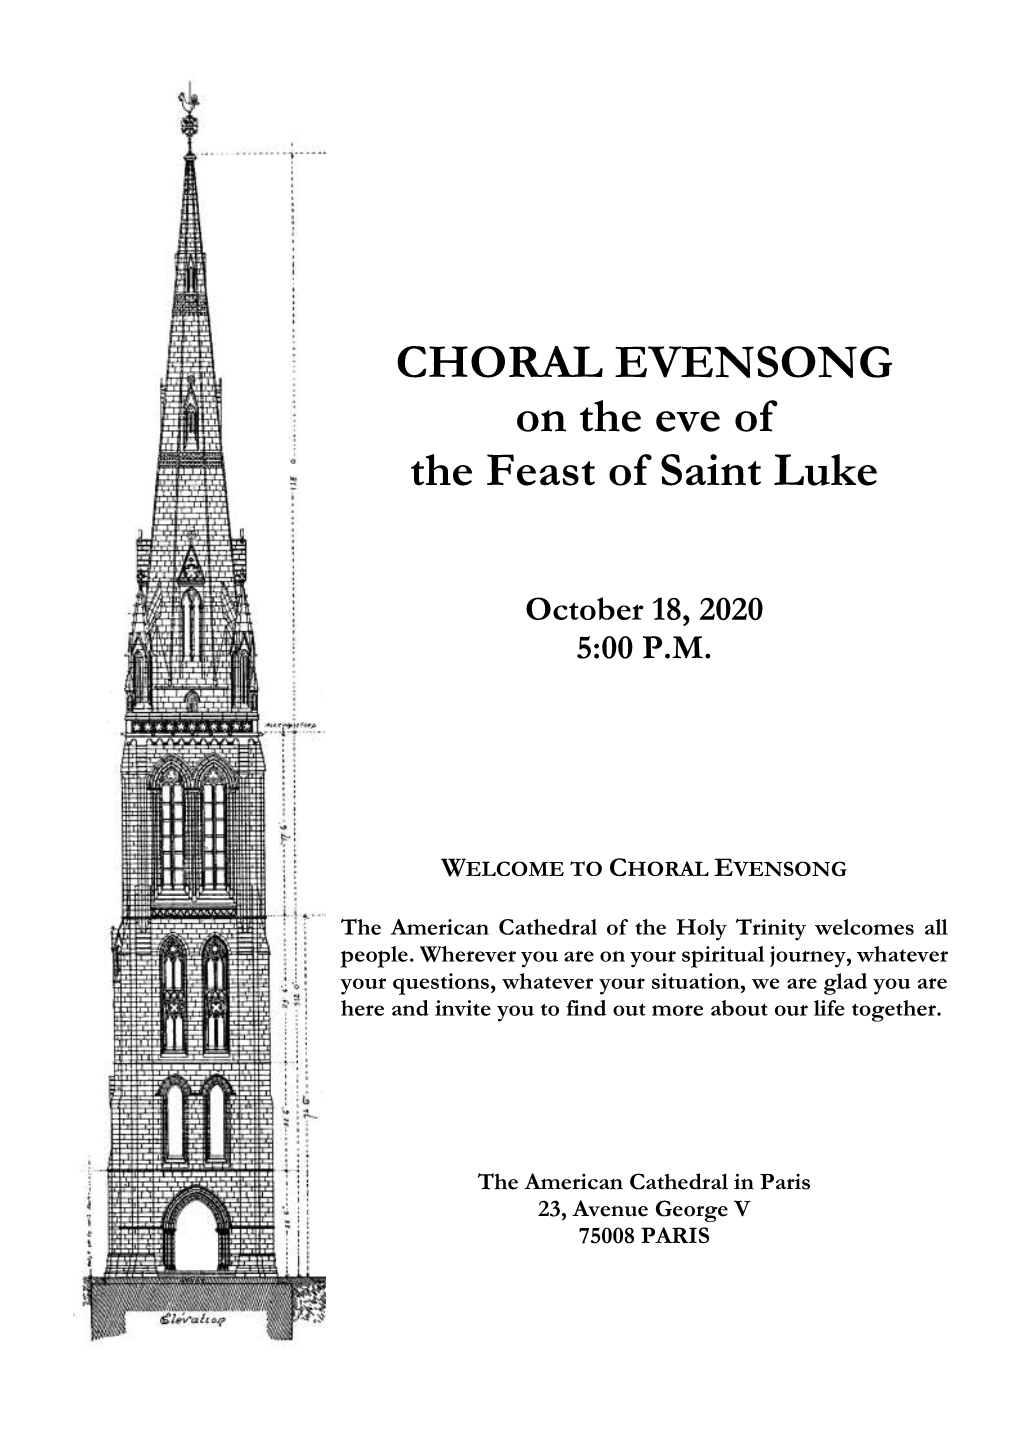 CHORAL EVENSONG on the Eve of the Feast of Saint Luke